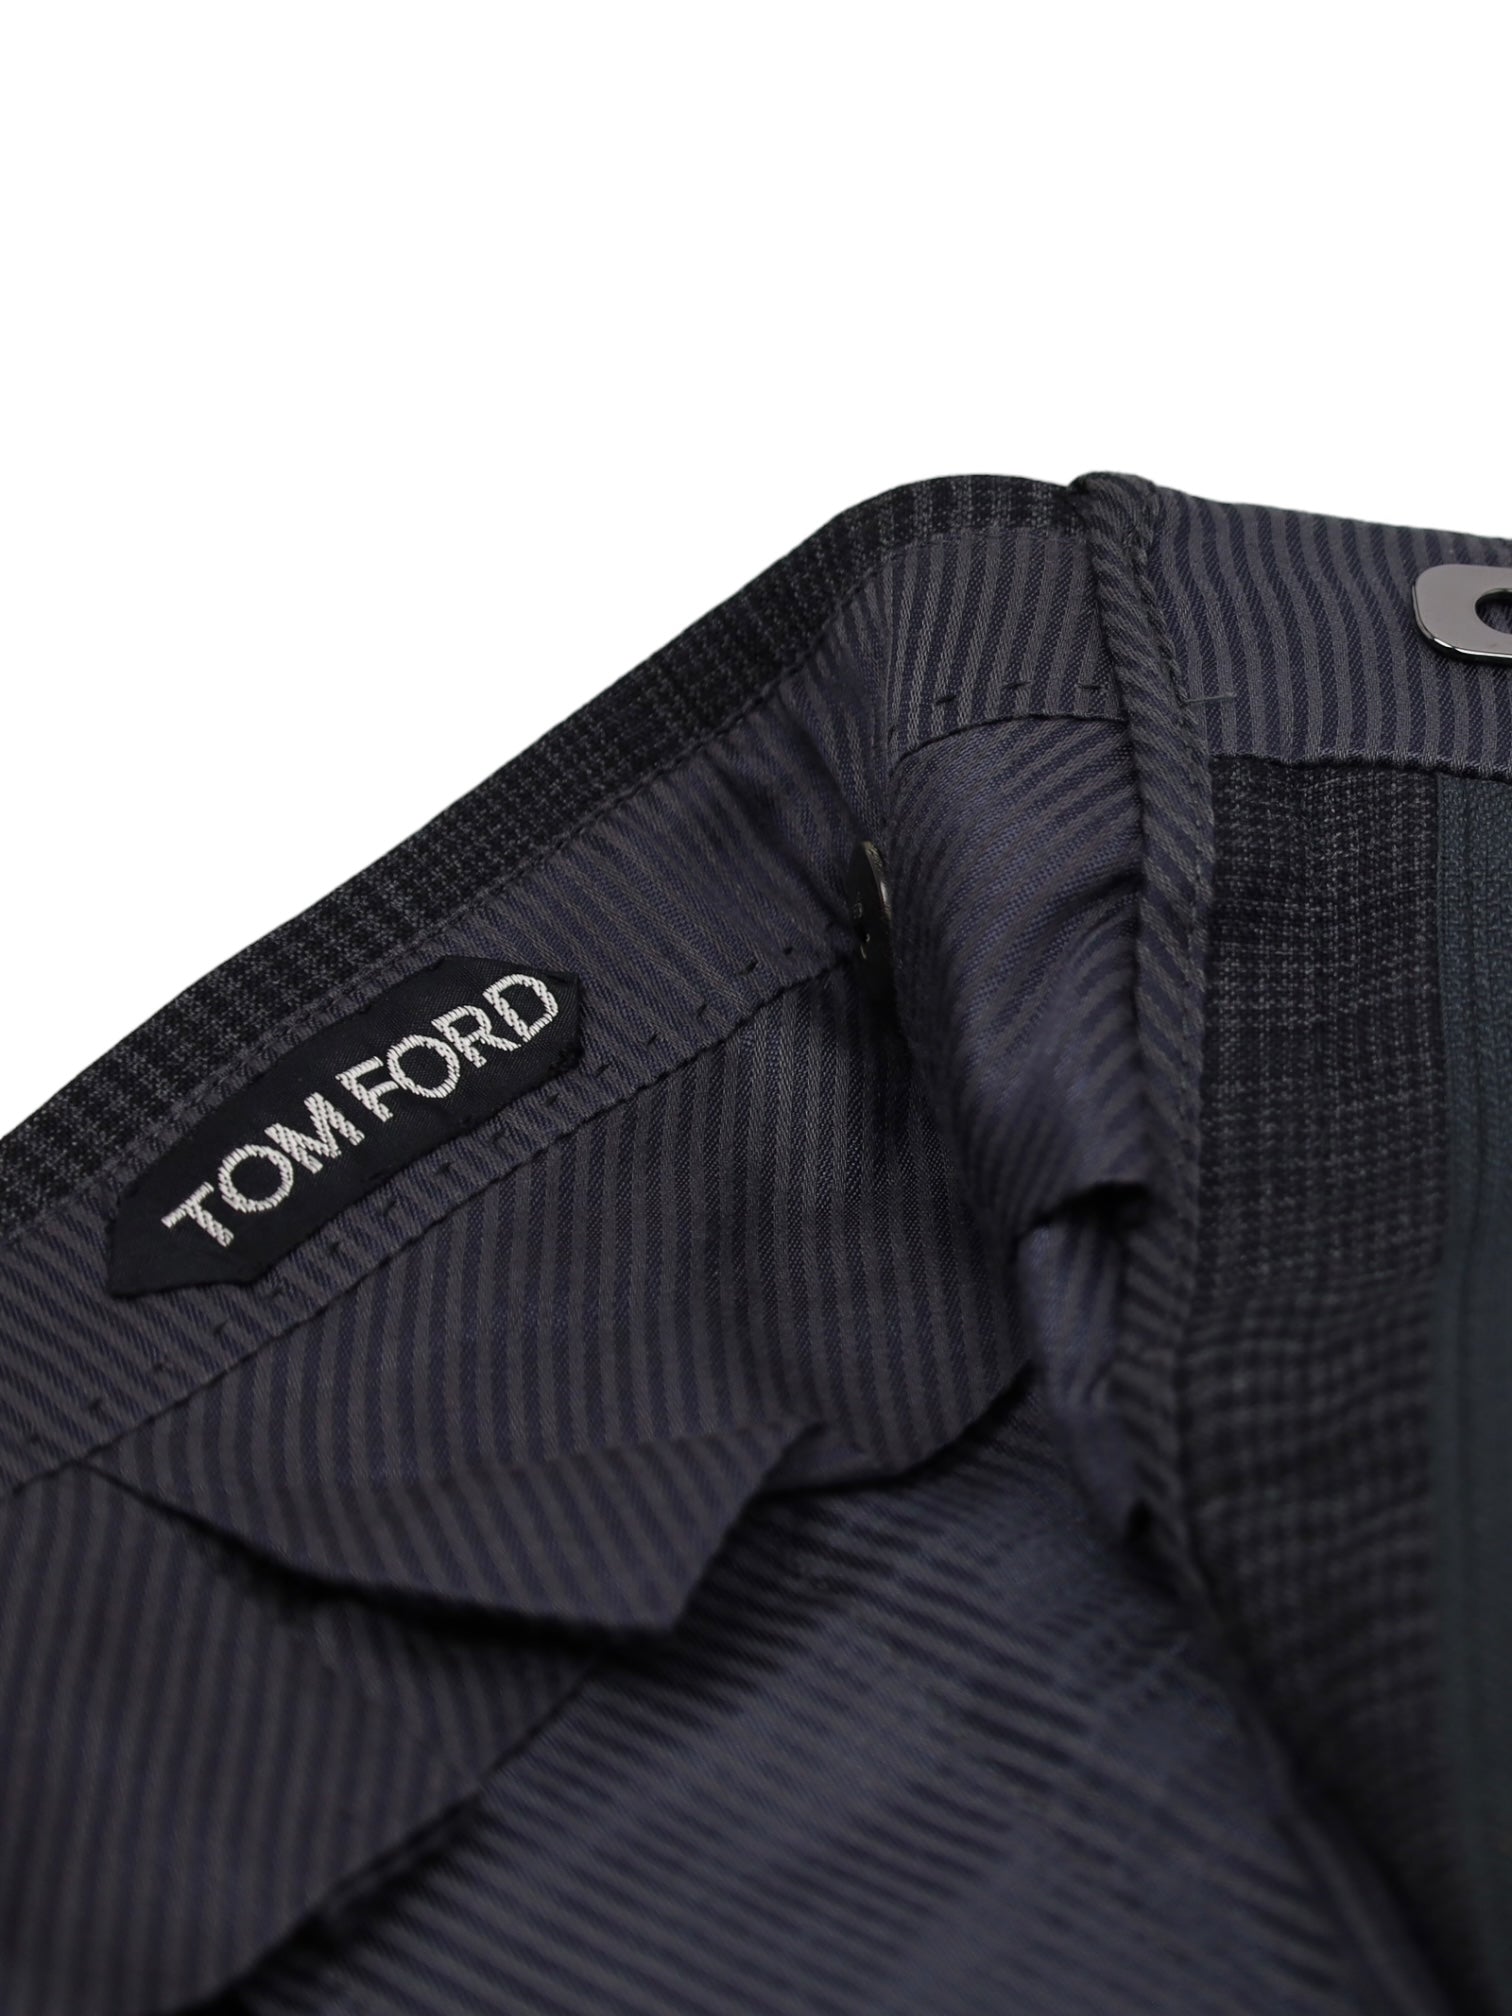 Tom Ford Grey Double Breasted Glenplaid Suit